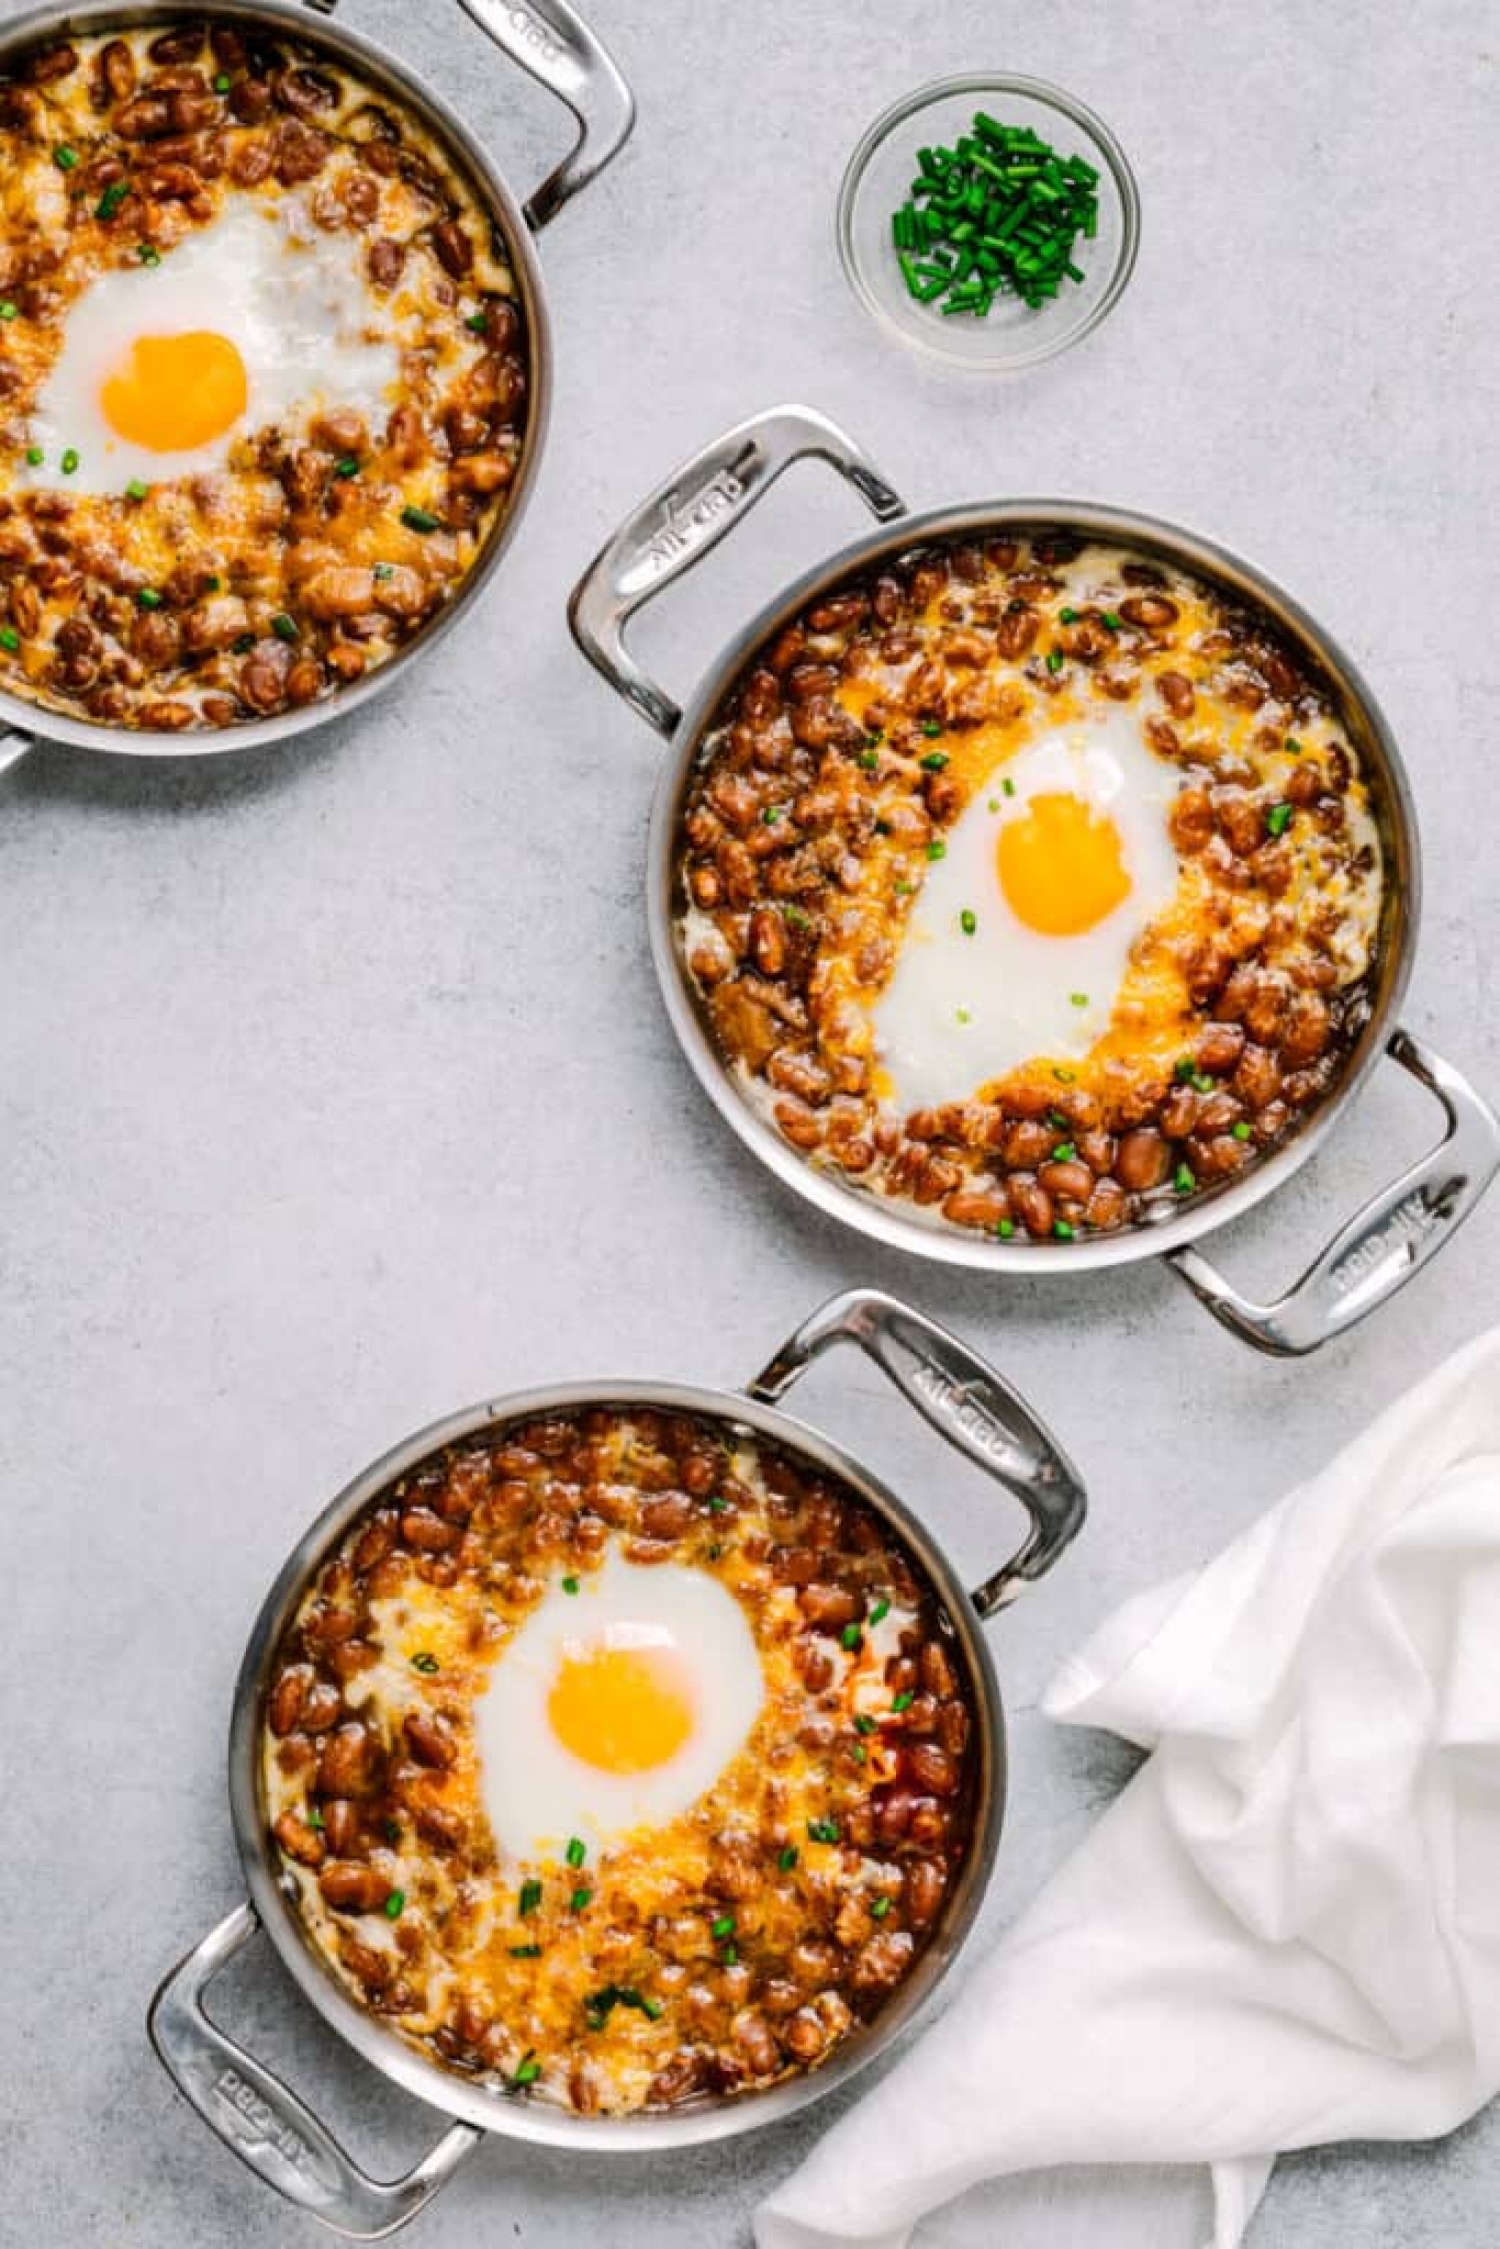 <p>Turn a can of baked beans into your main dish with <a href="https://poshjournal.com/egg-and-baked-beans" rel="noopener">this incredibly easy 4-ingredient recipe</a> that's good for breakfast, lunch or dinner! It calls for spicy Louisiana hot sauce, but feel free to swap in whichever one you have on hand.</p>